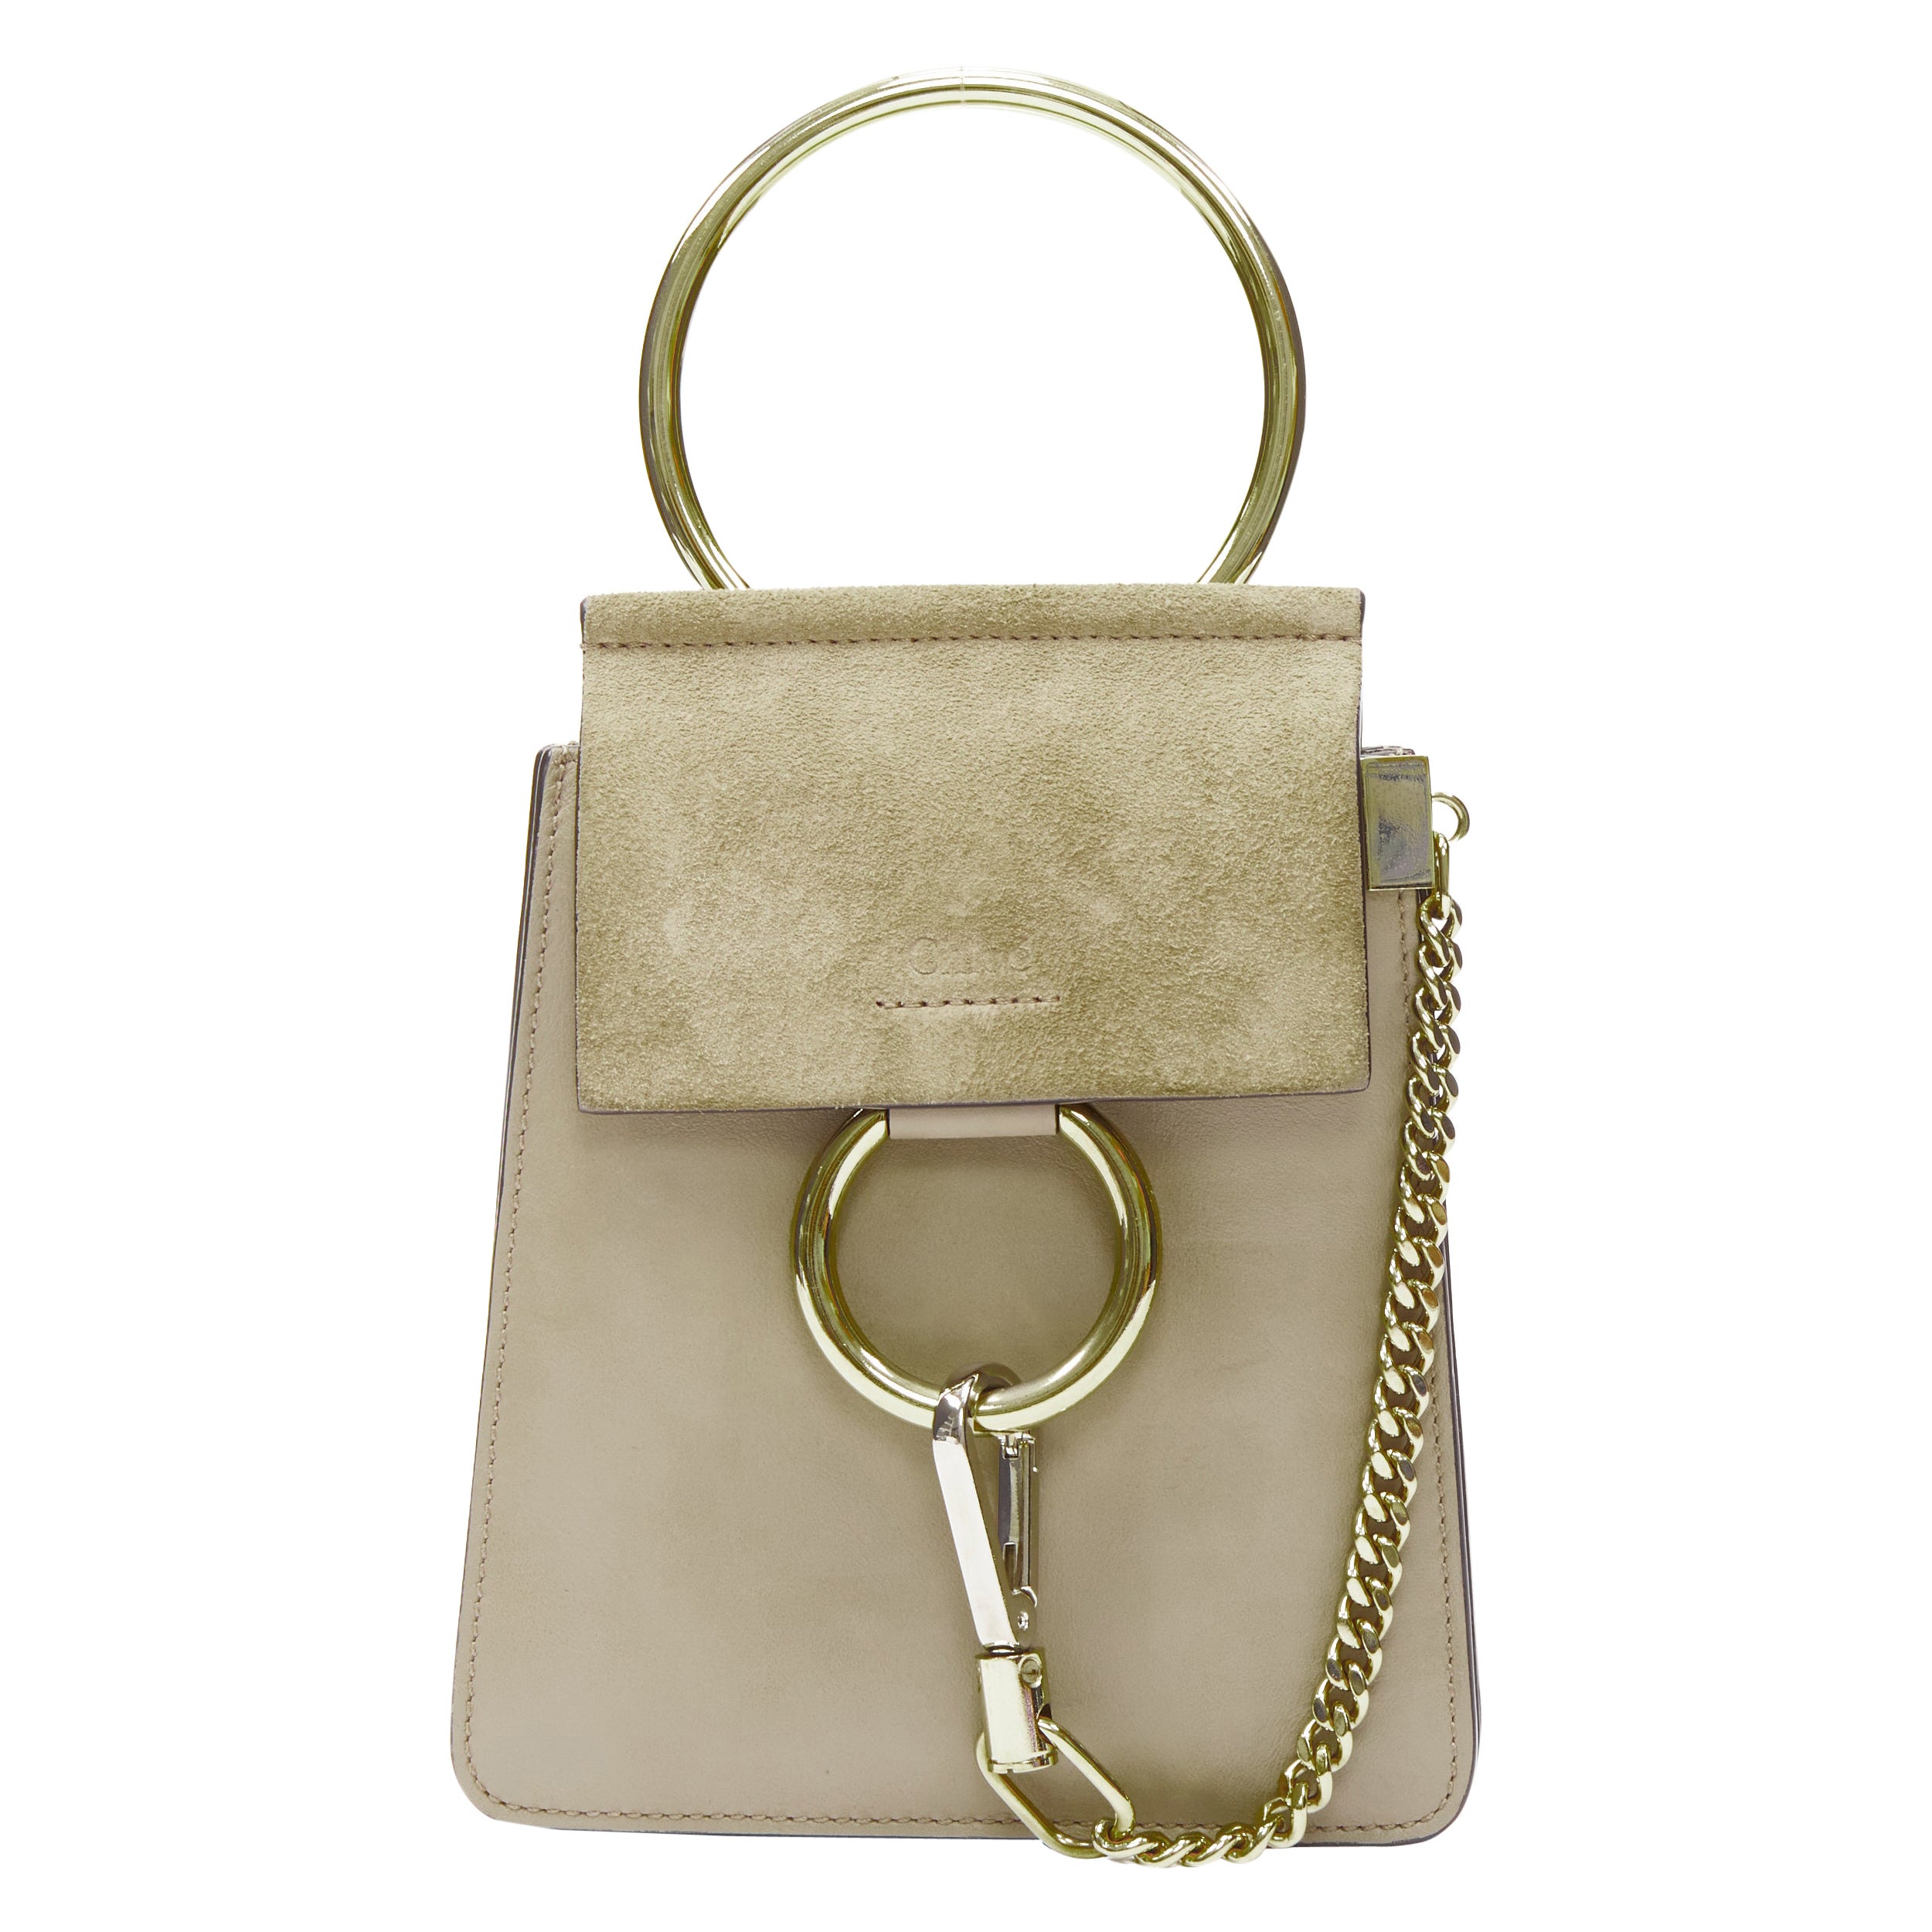 CHLOE Faye gold bangle bracelet ring chained crossbody grey suede leather bag For Sale